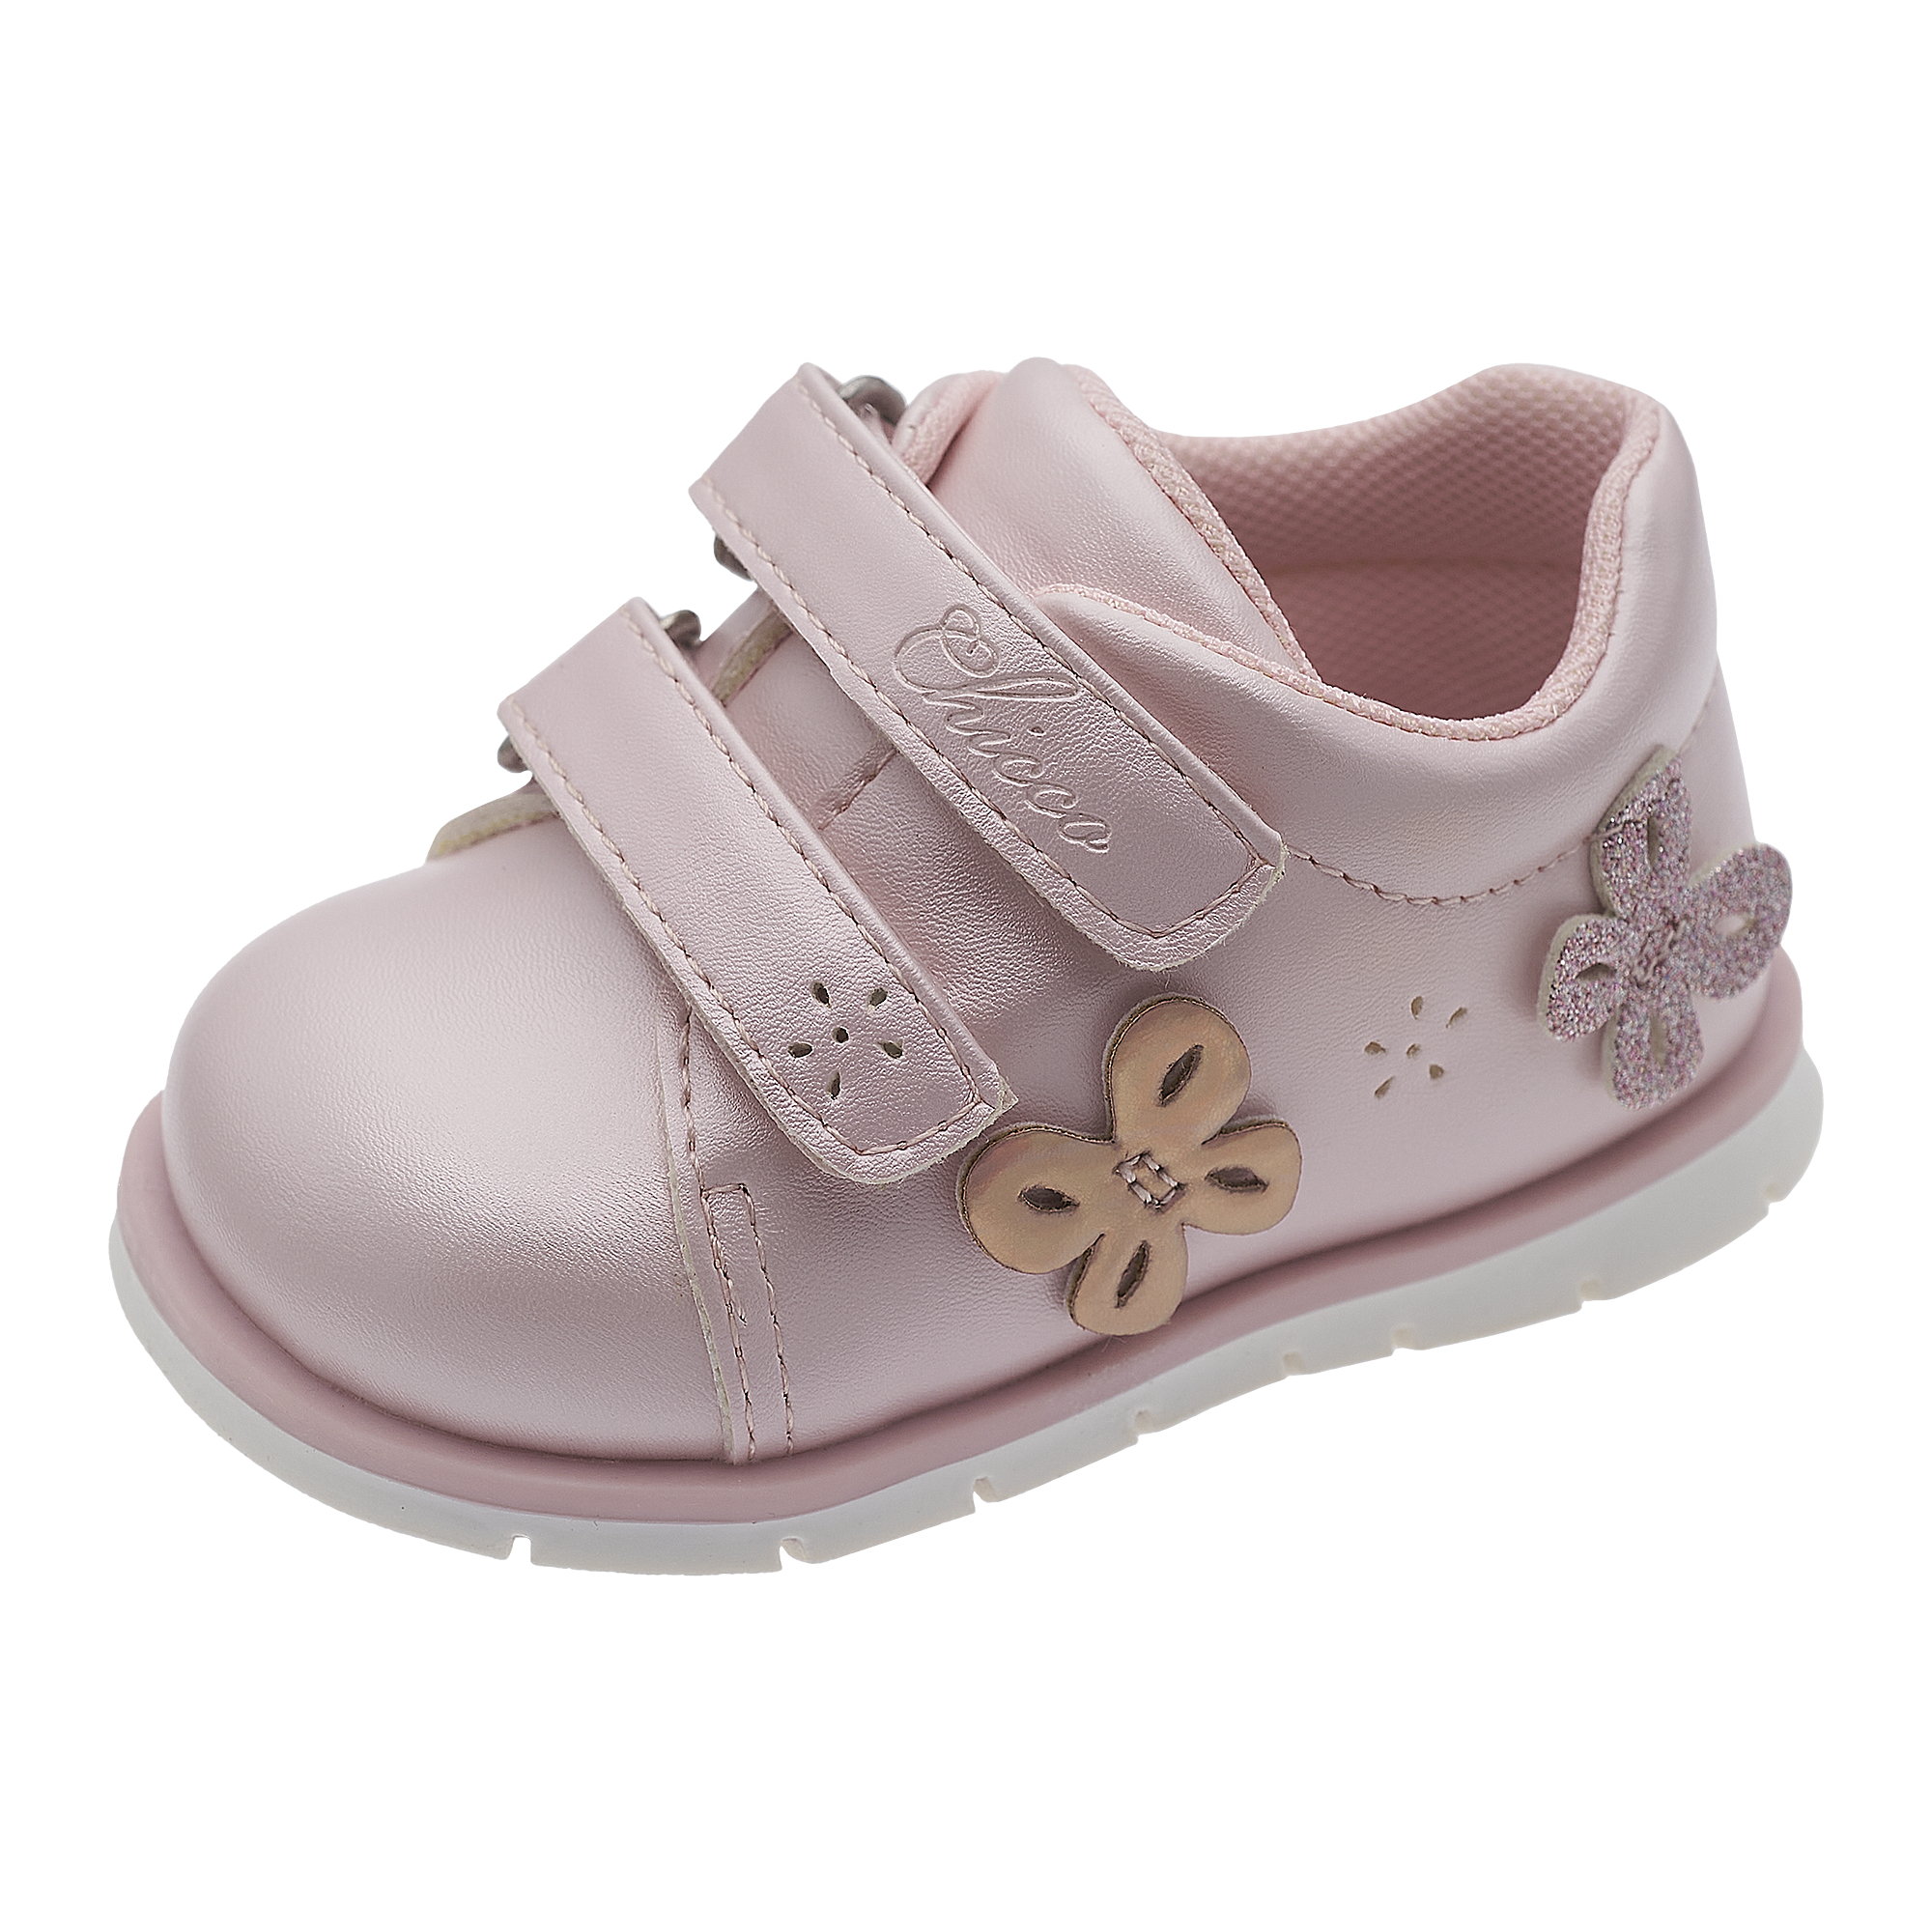 Chicco sneaker flannery - Chicco